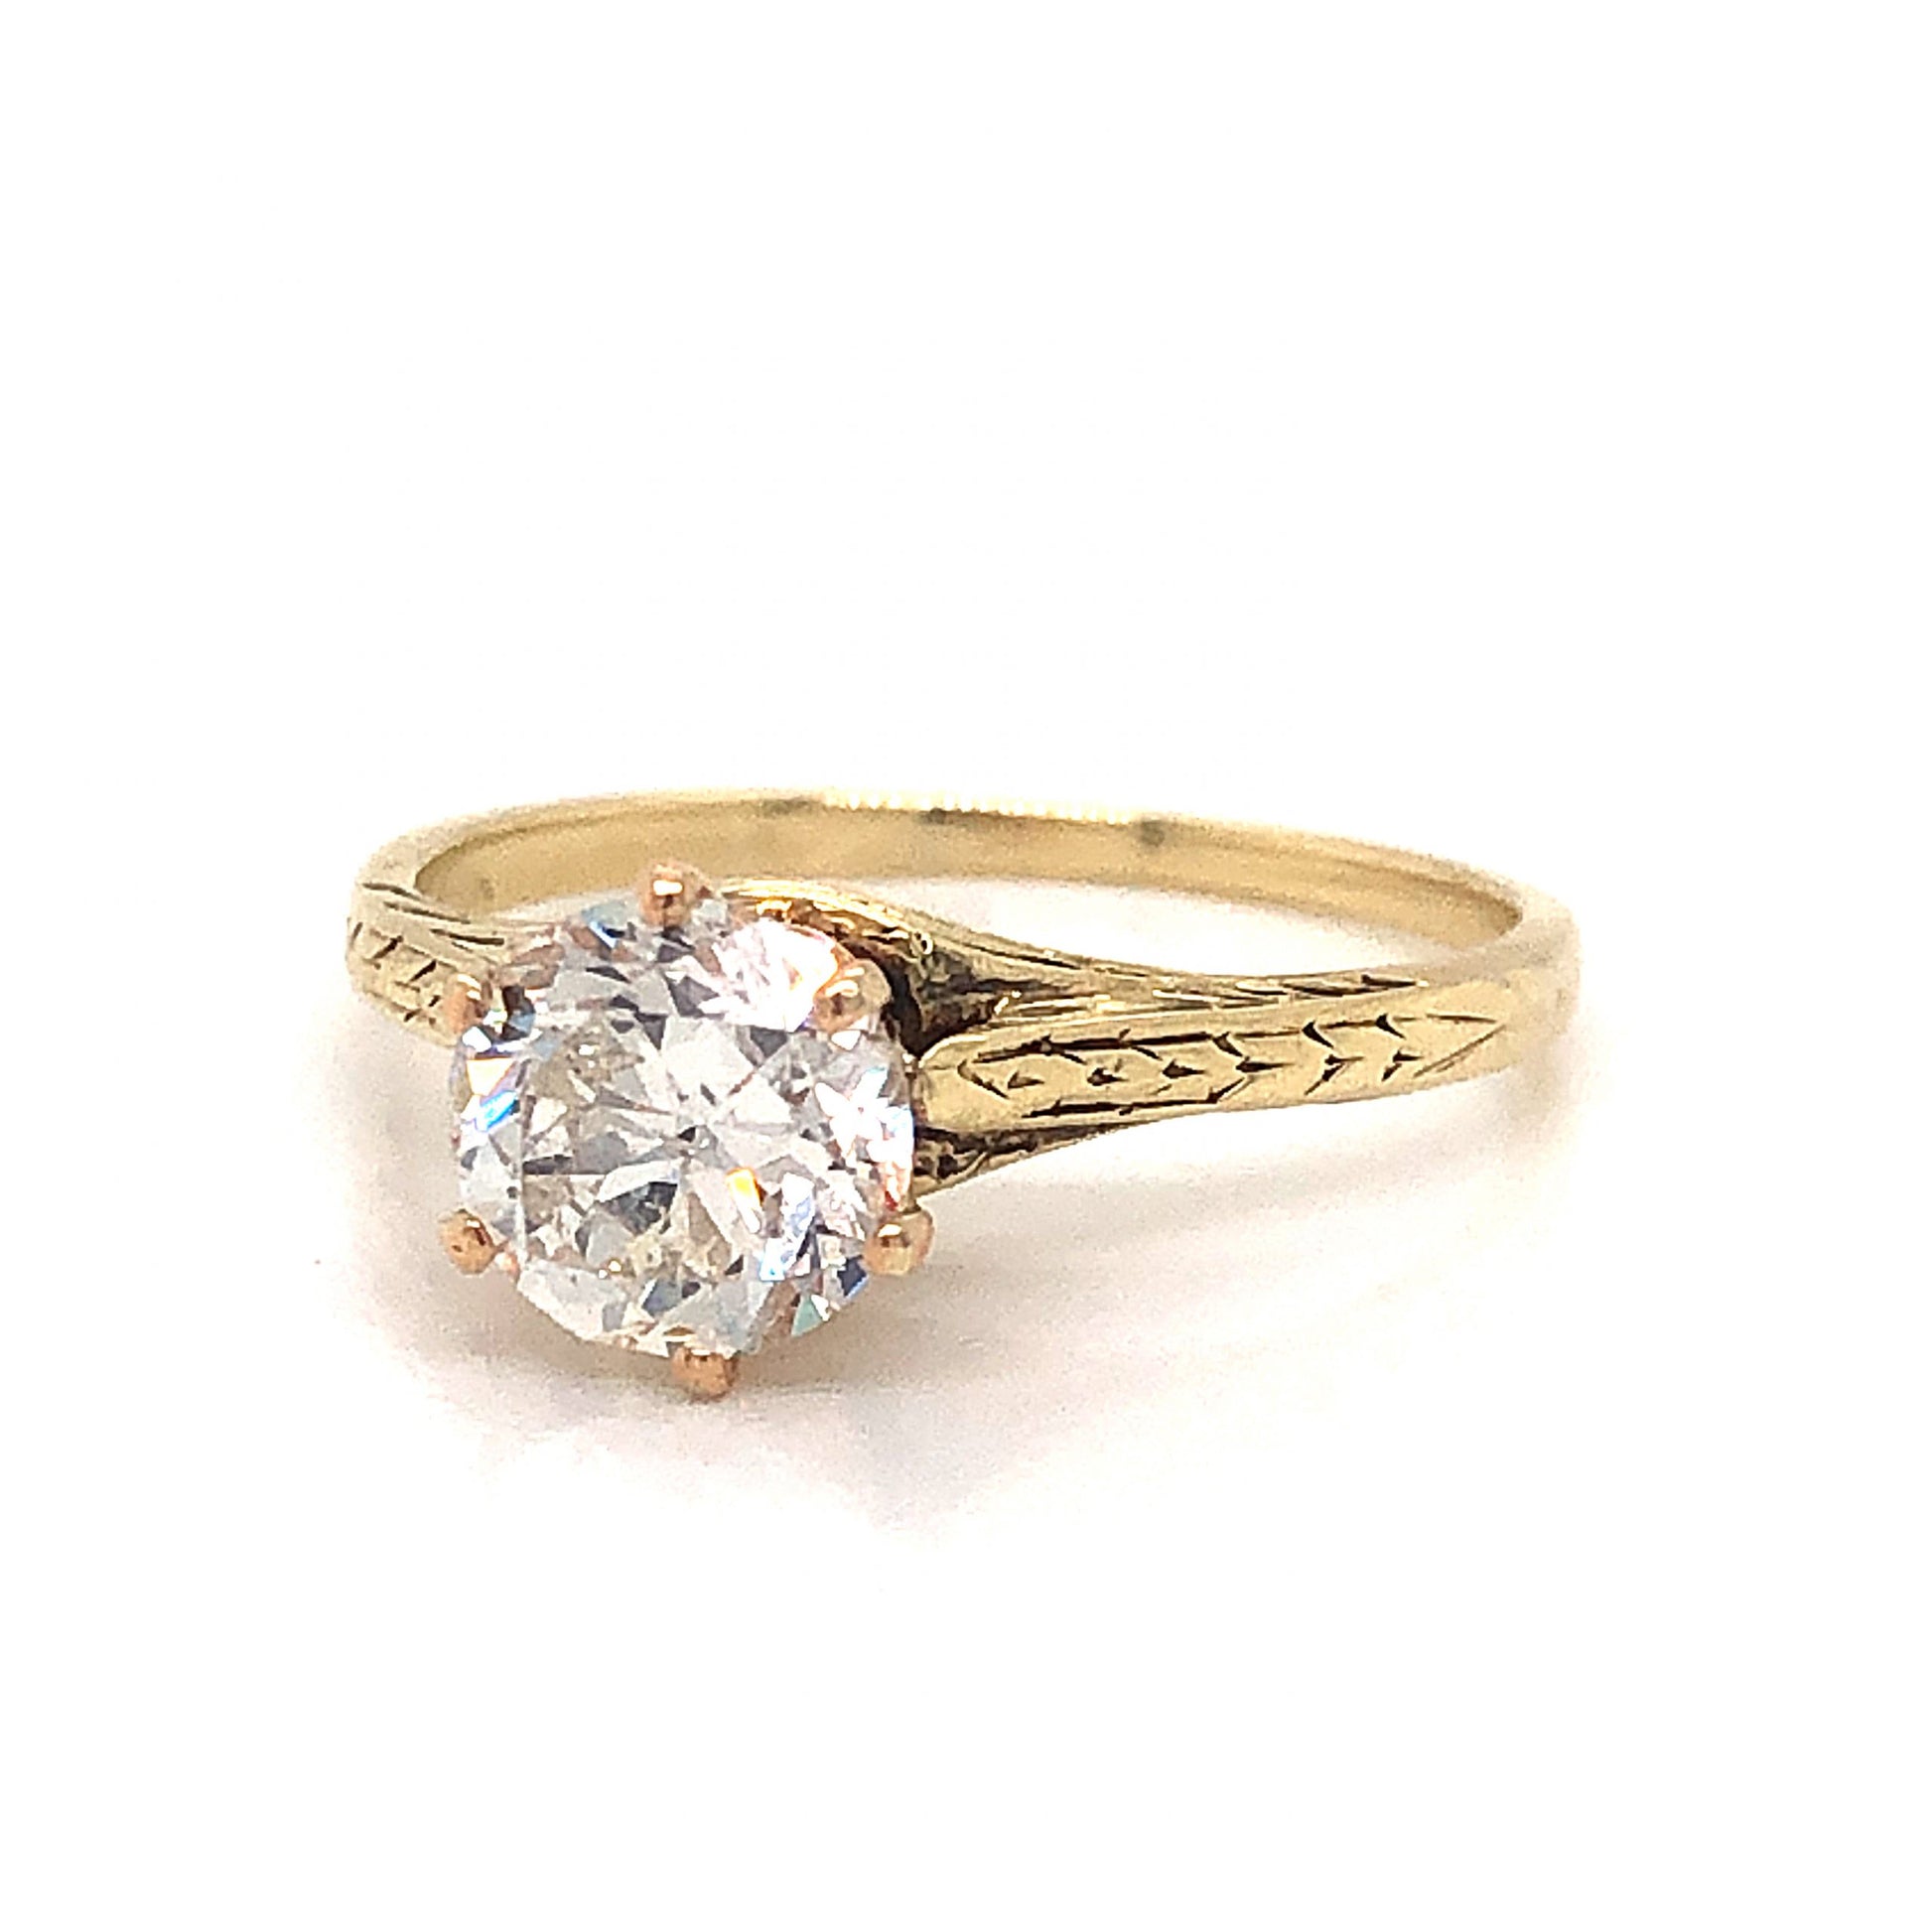 Victorian Engraved Solitaire Diamond Engagement Ring in 14kComposition: 14 Karat Yellow Gold/14 Karat Rose Gold Ring Size: 5.5 Total Diamond Weight: 1.02ct Total Gram Weight: 2.1 g